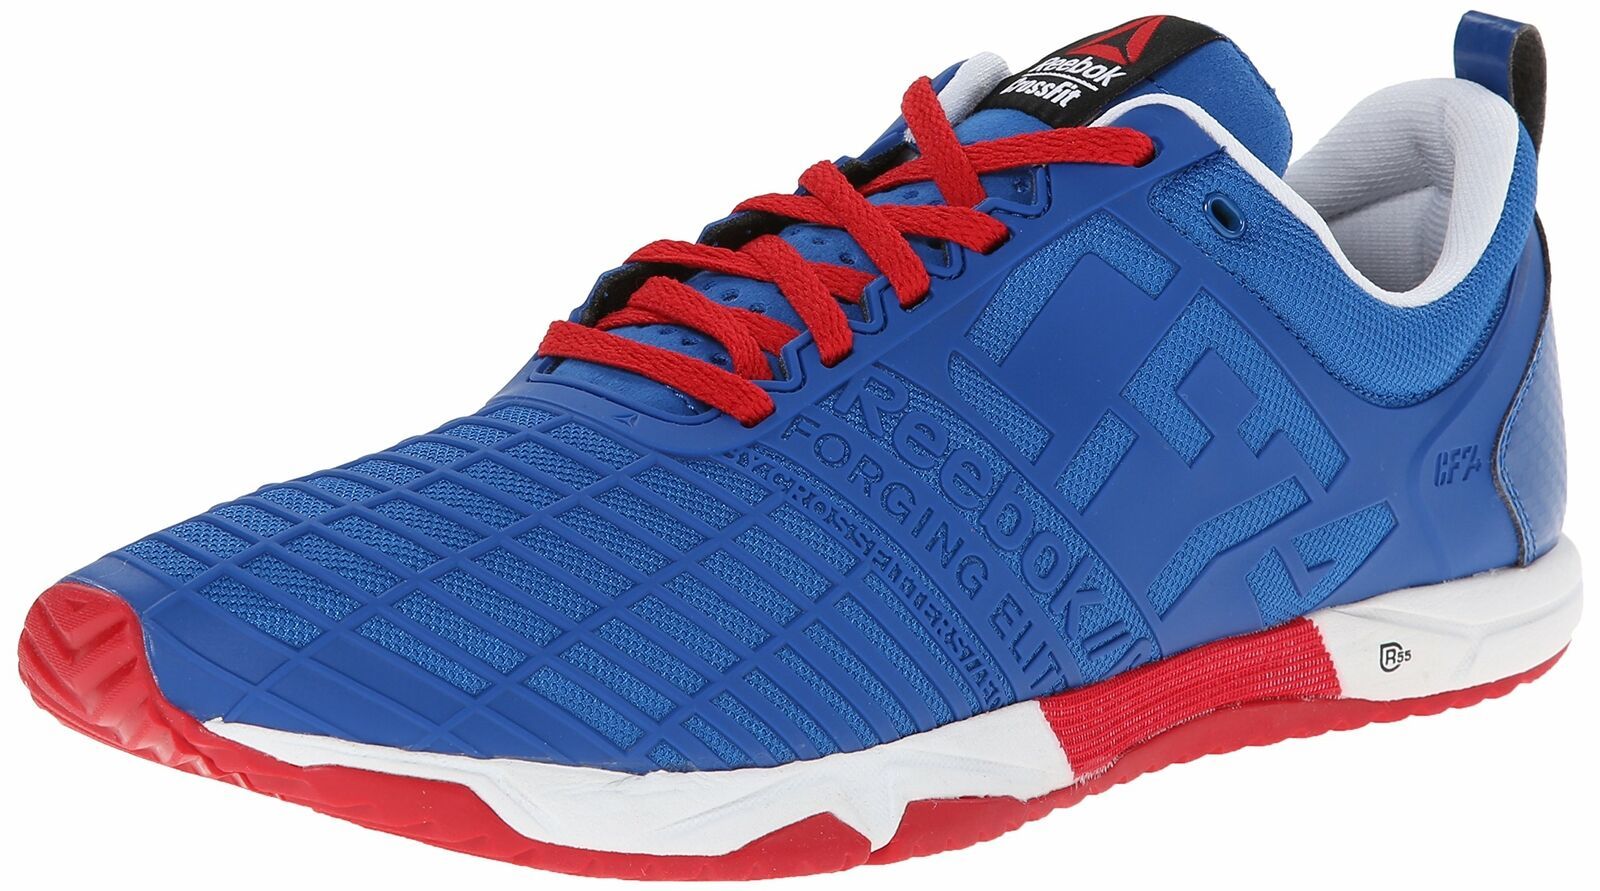 Primary image for Reebok Men's Crossfit Sprint TR Training Shoe Impact Blue/Excellent Red/White 8